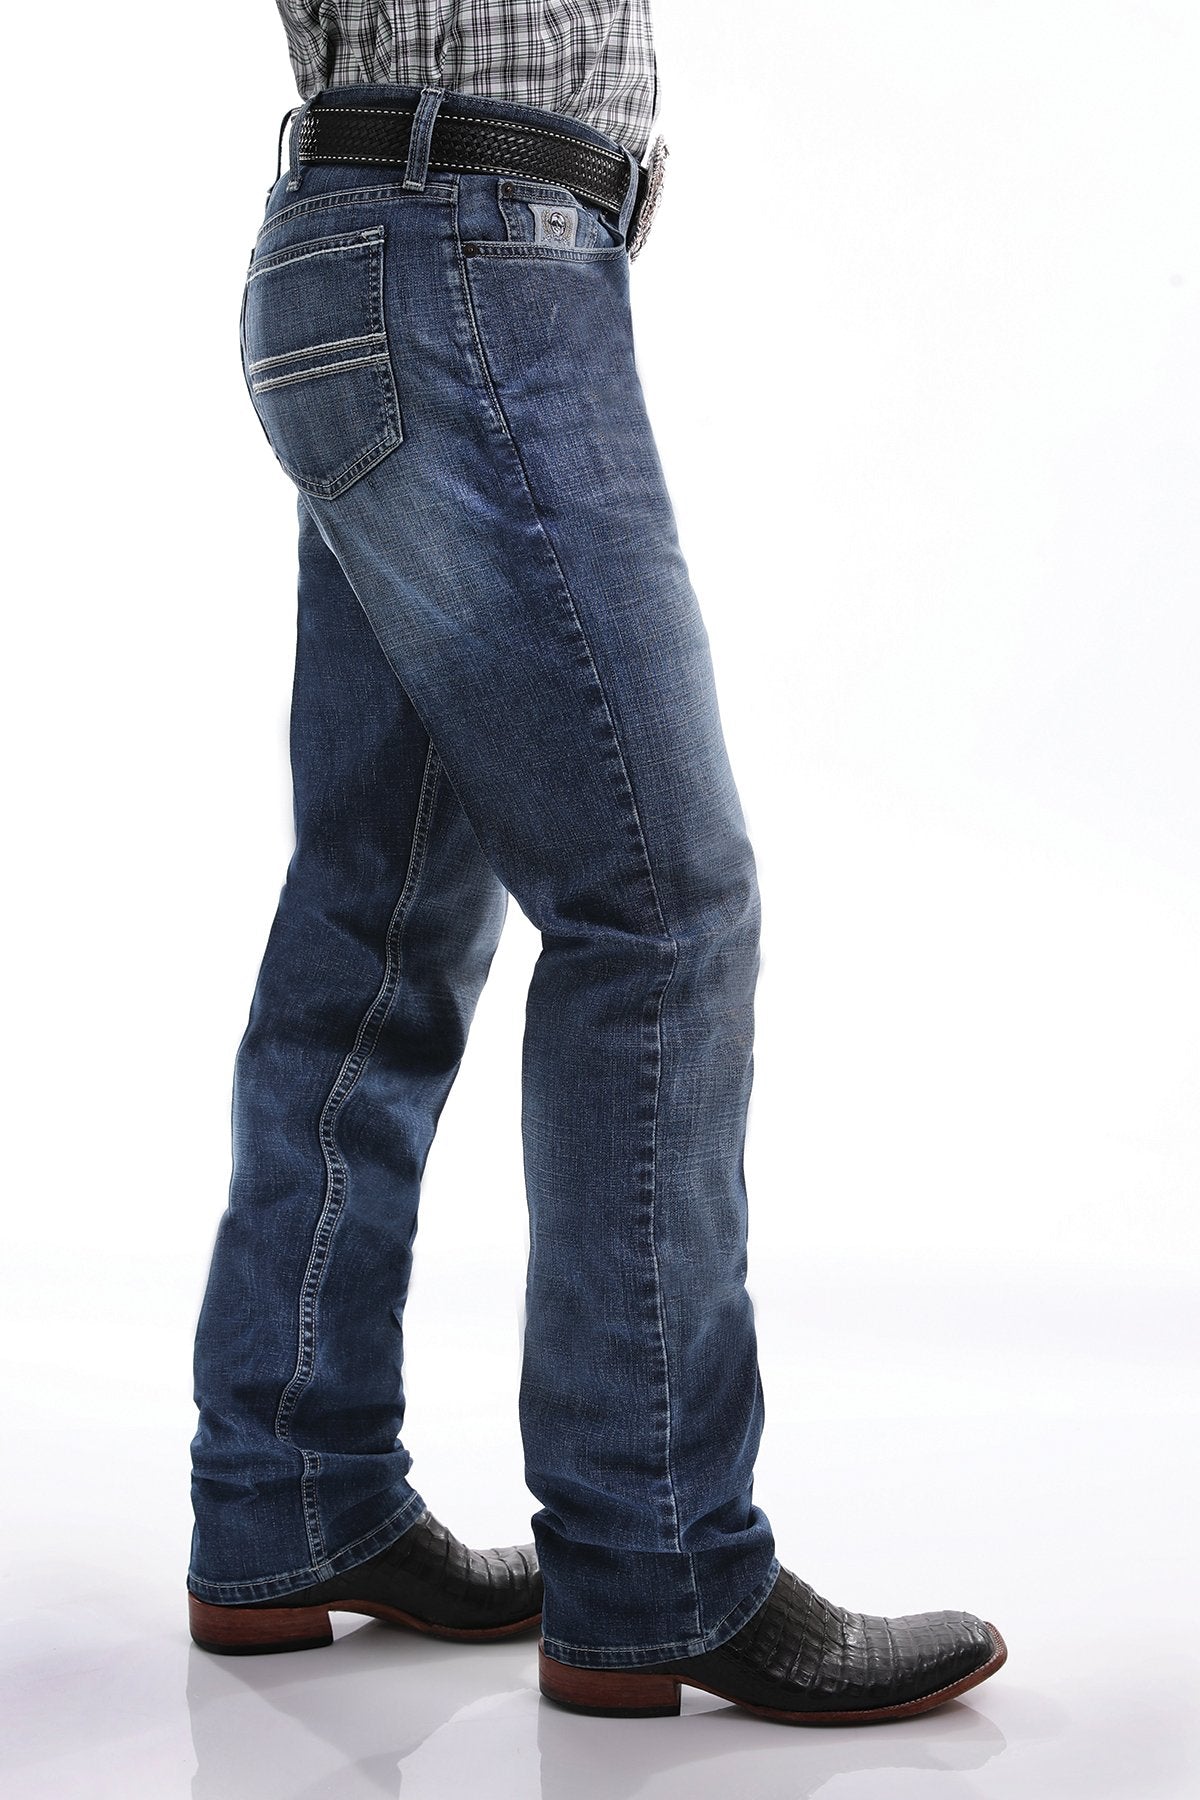 Cinch Mens Silver Label February Jean - MB98034013